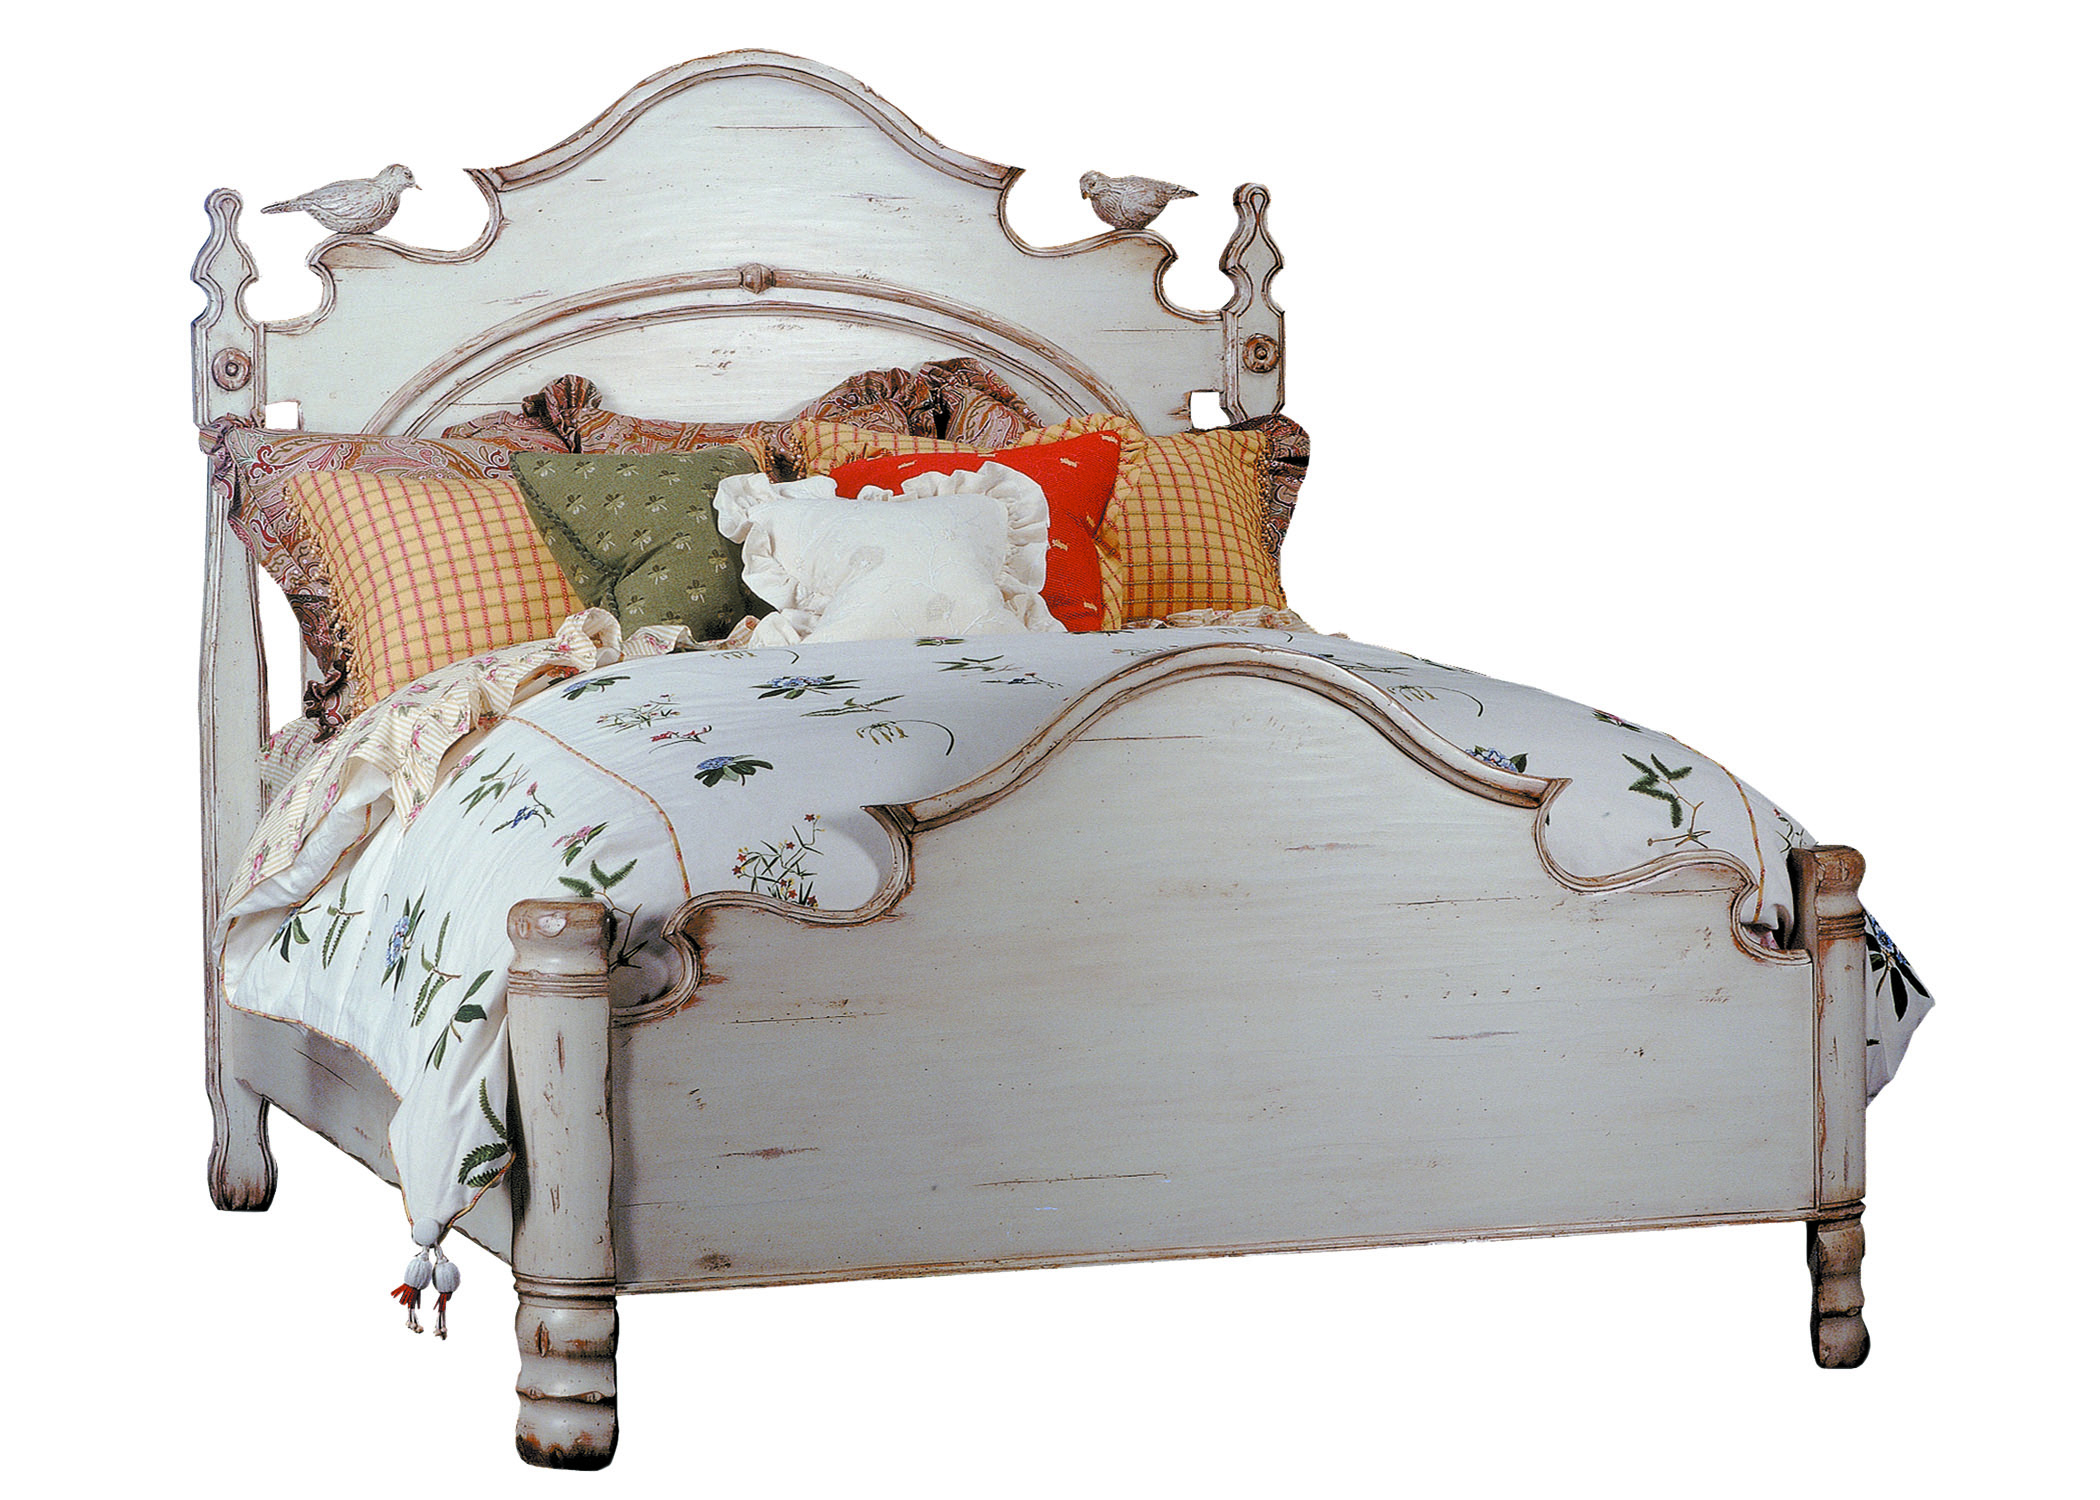 Madeline traditional farmhouse country painted distressed bed with carved bird on headboard / footboard by Woodland furniture in Idaho Falls